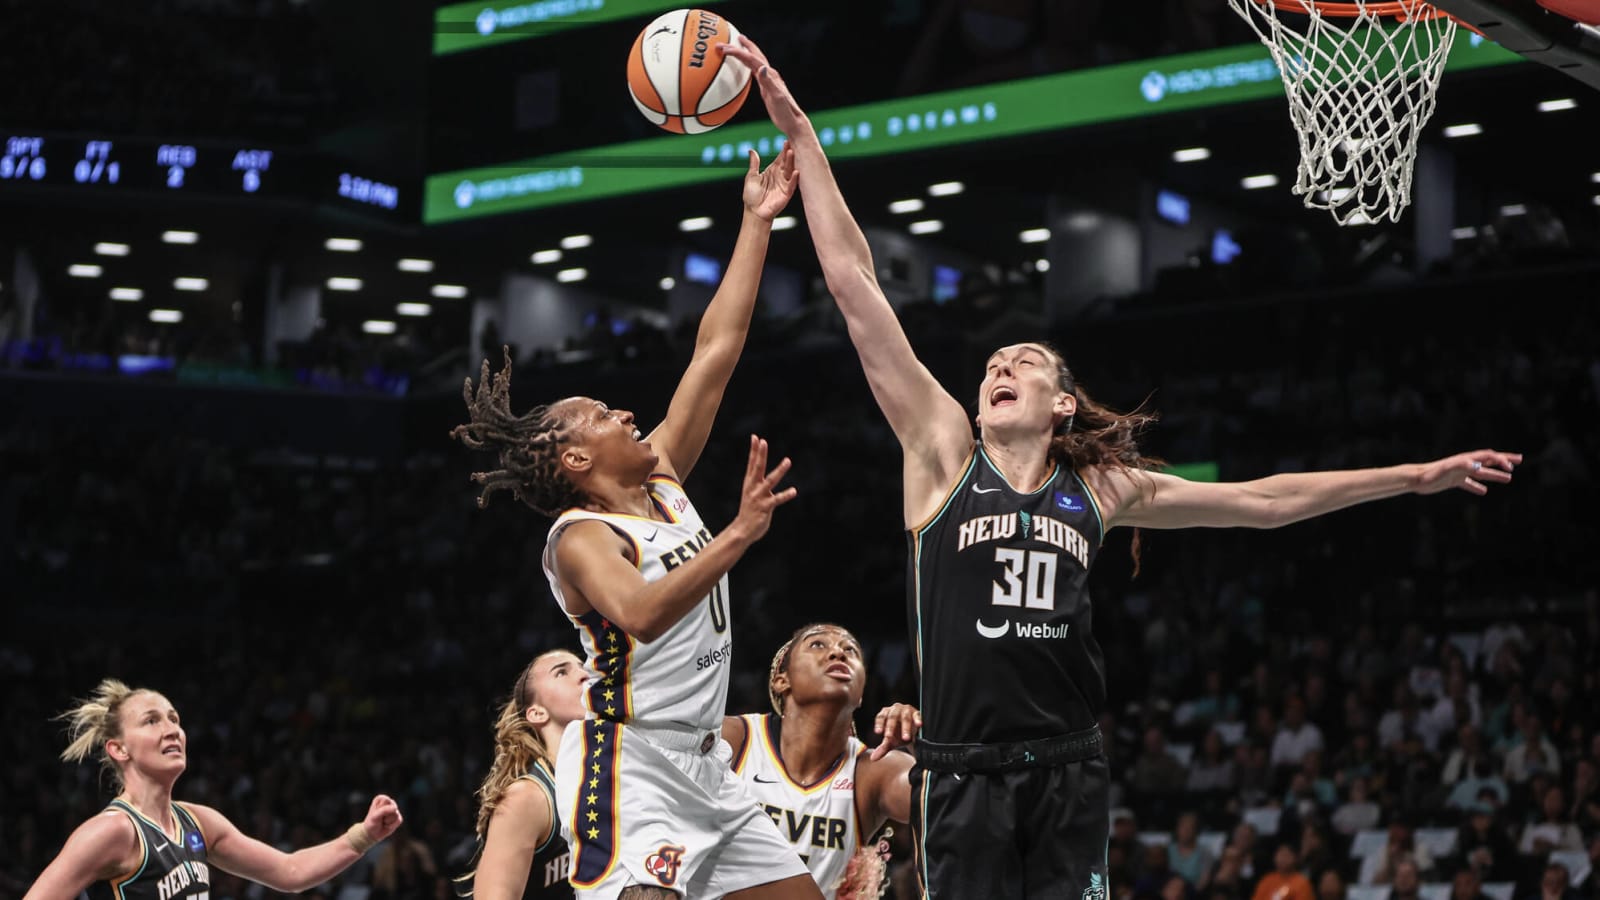 Recapping the New York Liberty and its Electric Home Opener